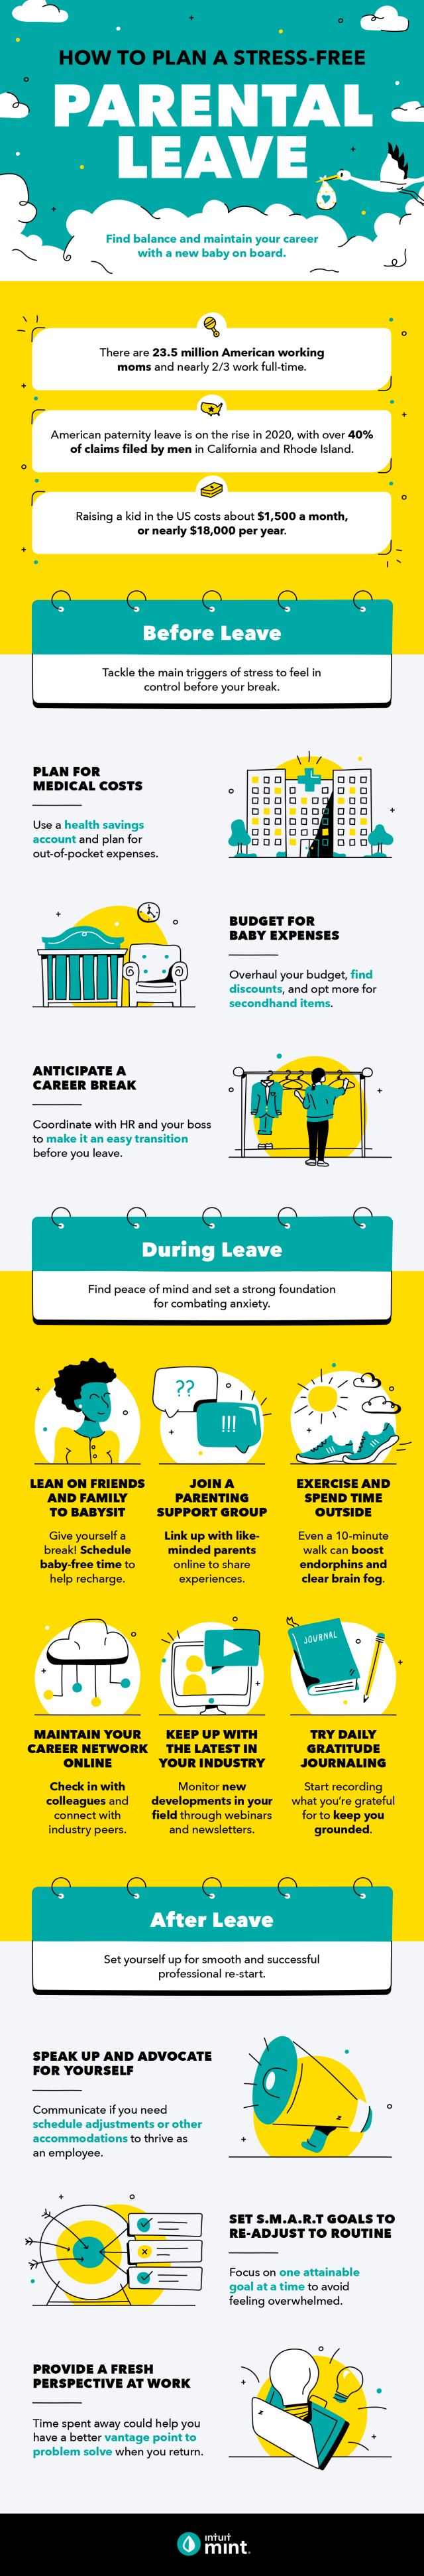 infographic with tips for a financially smart parental leave